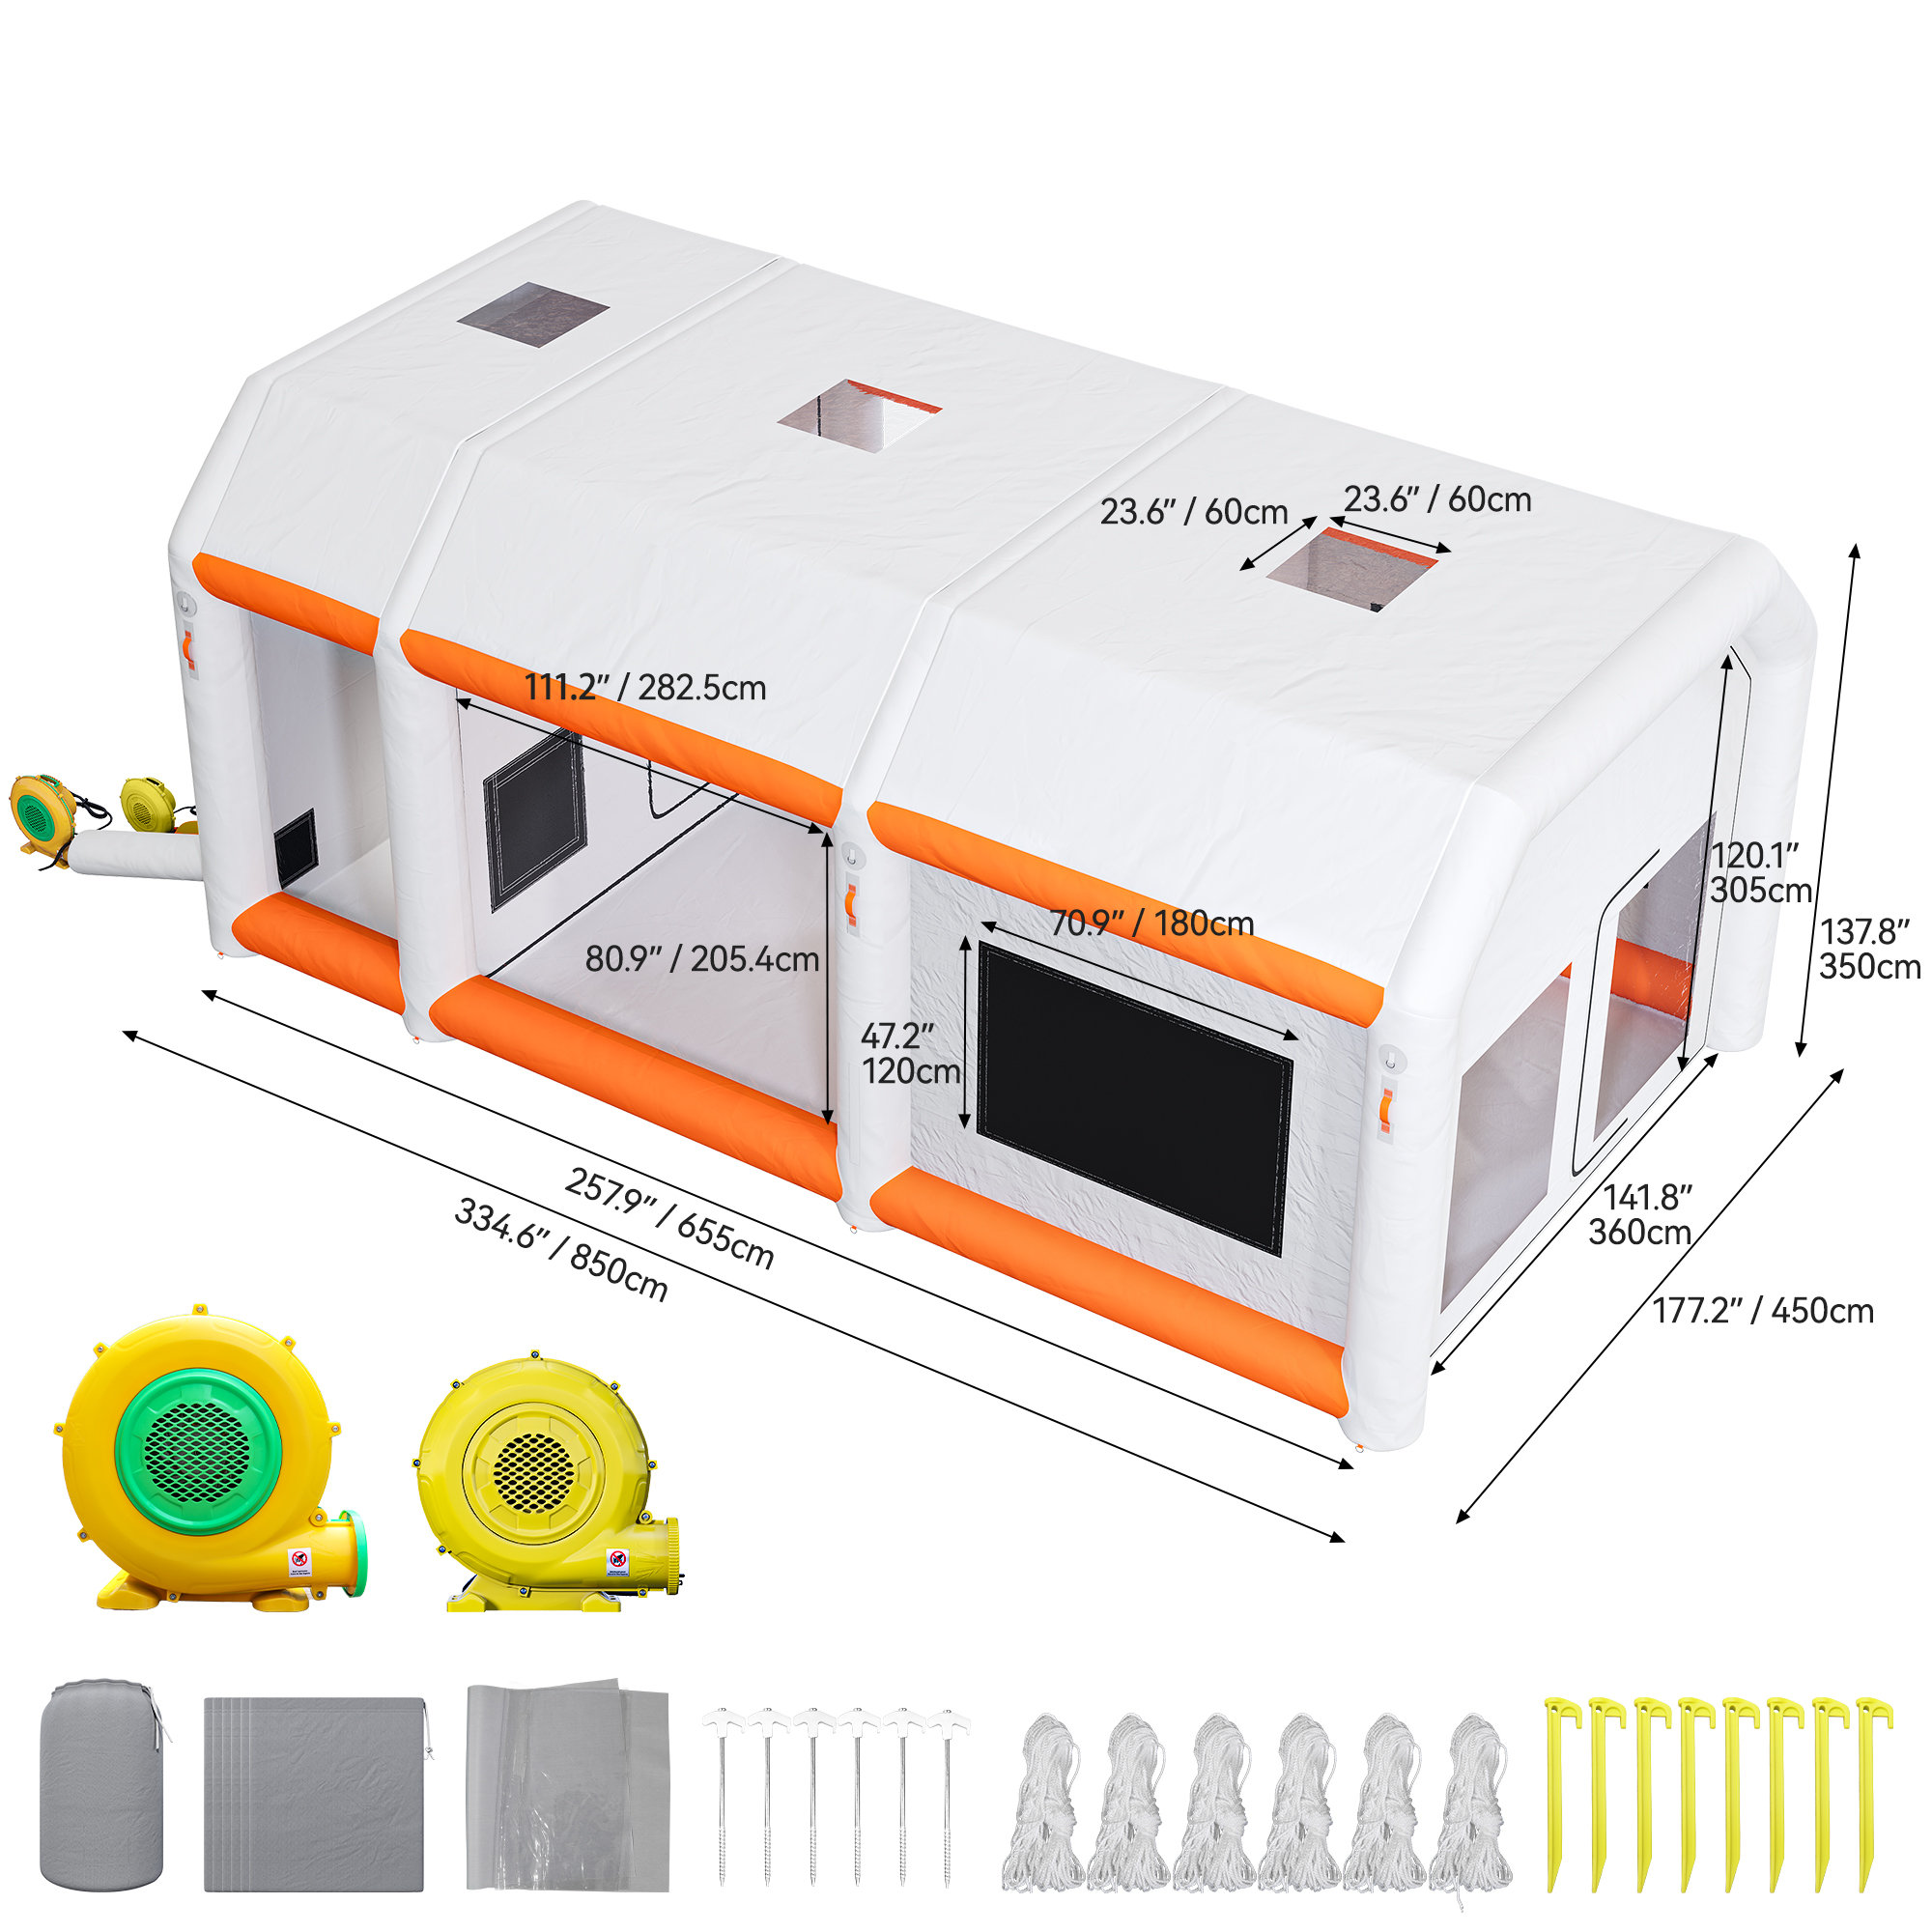 Portable Inflatable Paint Booth Large Spray Booth Car Paint Tent w/Air Filter System & Blowers Edrosie Inc Size: 118 H x 315 W x 177.2 D